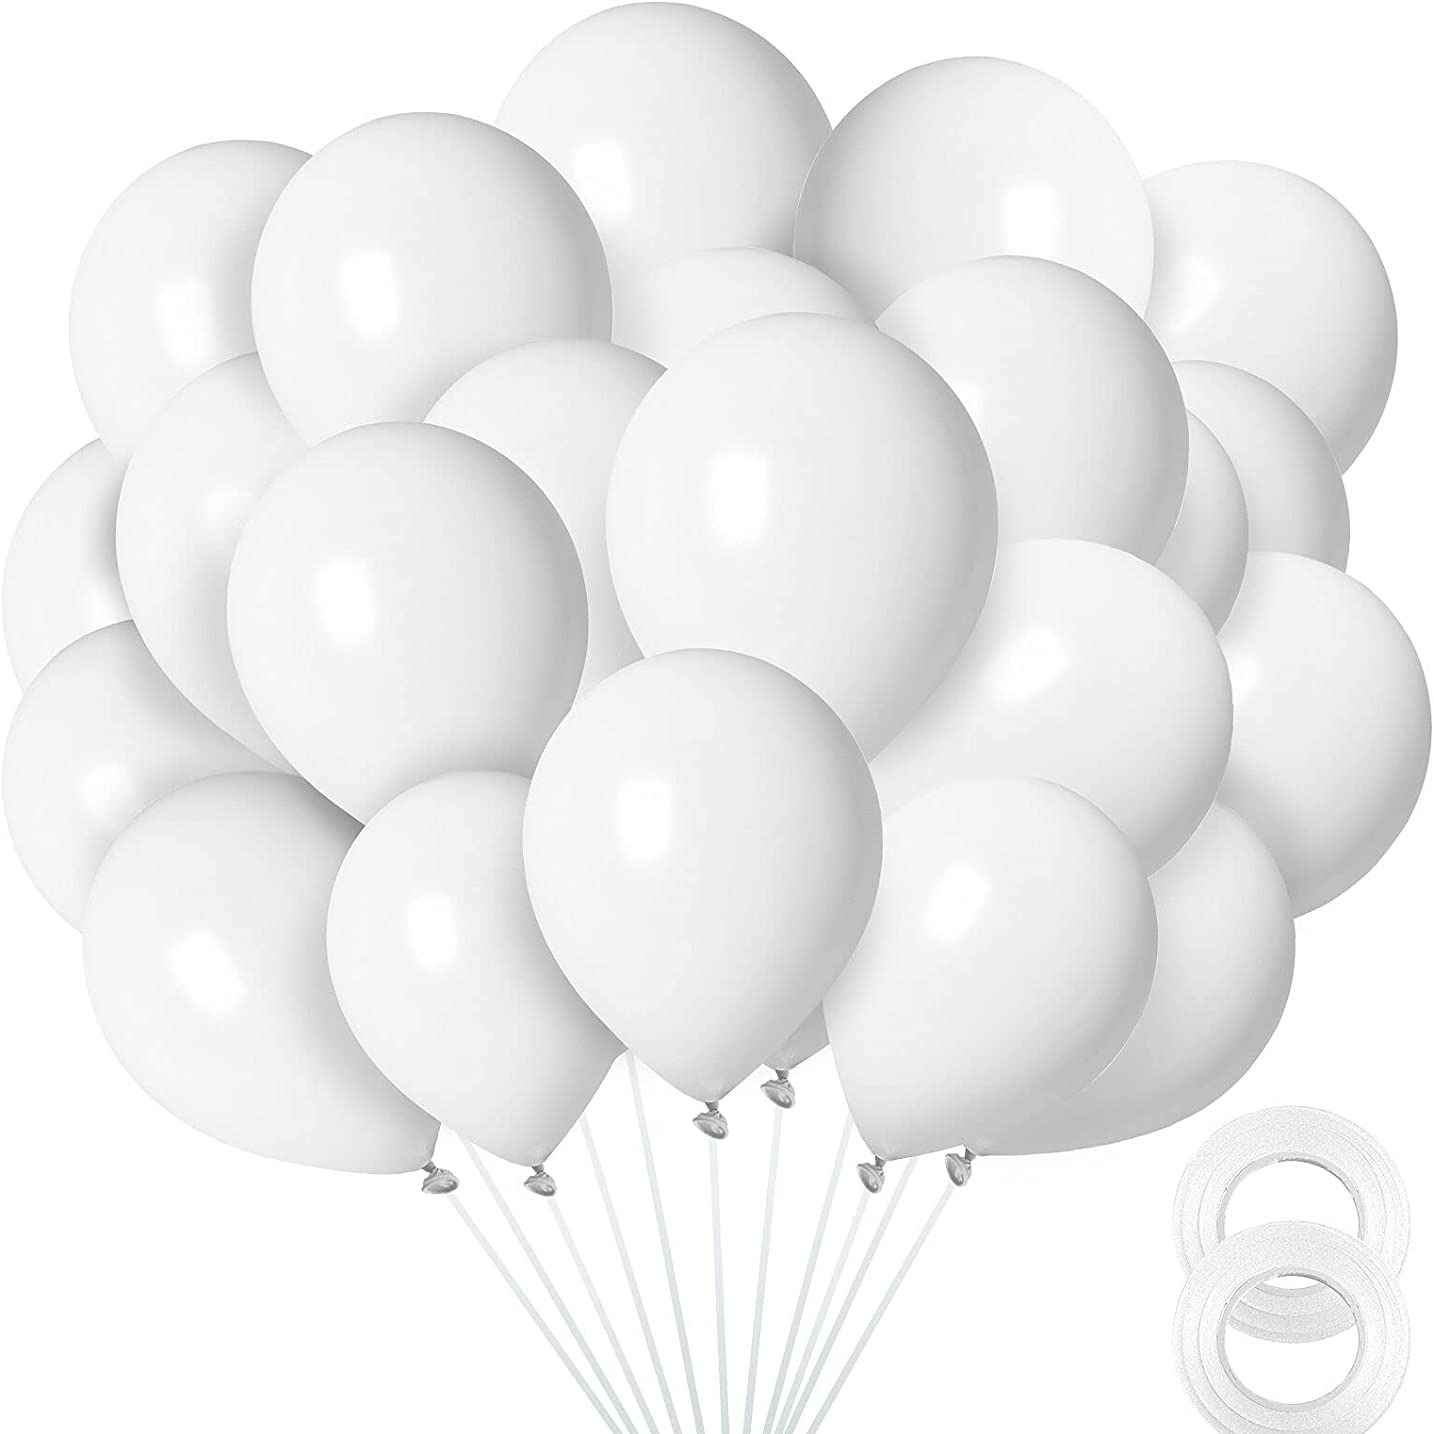 100pcs 12 Inch Balloons (Black and White Balloons)Premium Thickened Latex  Balloons for Black and White Party Decorations 